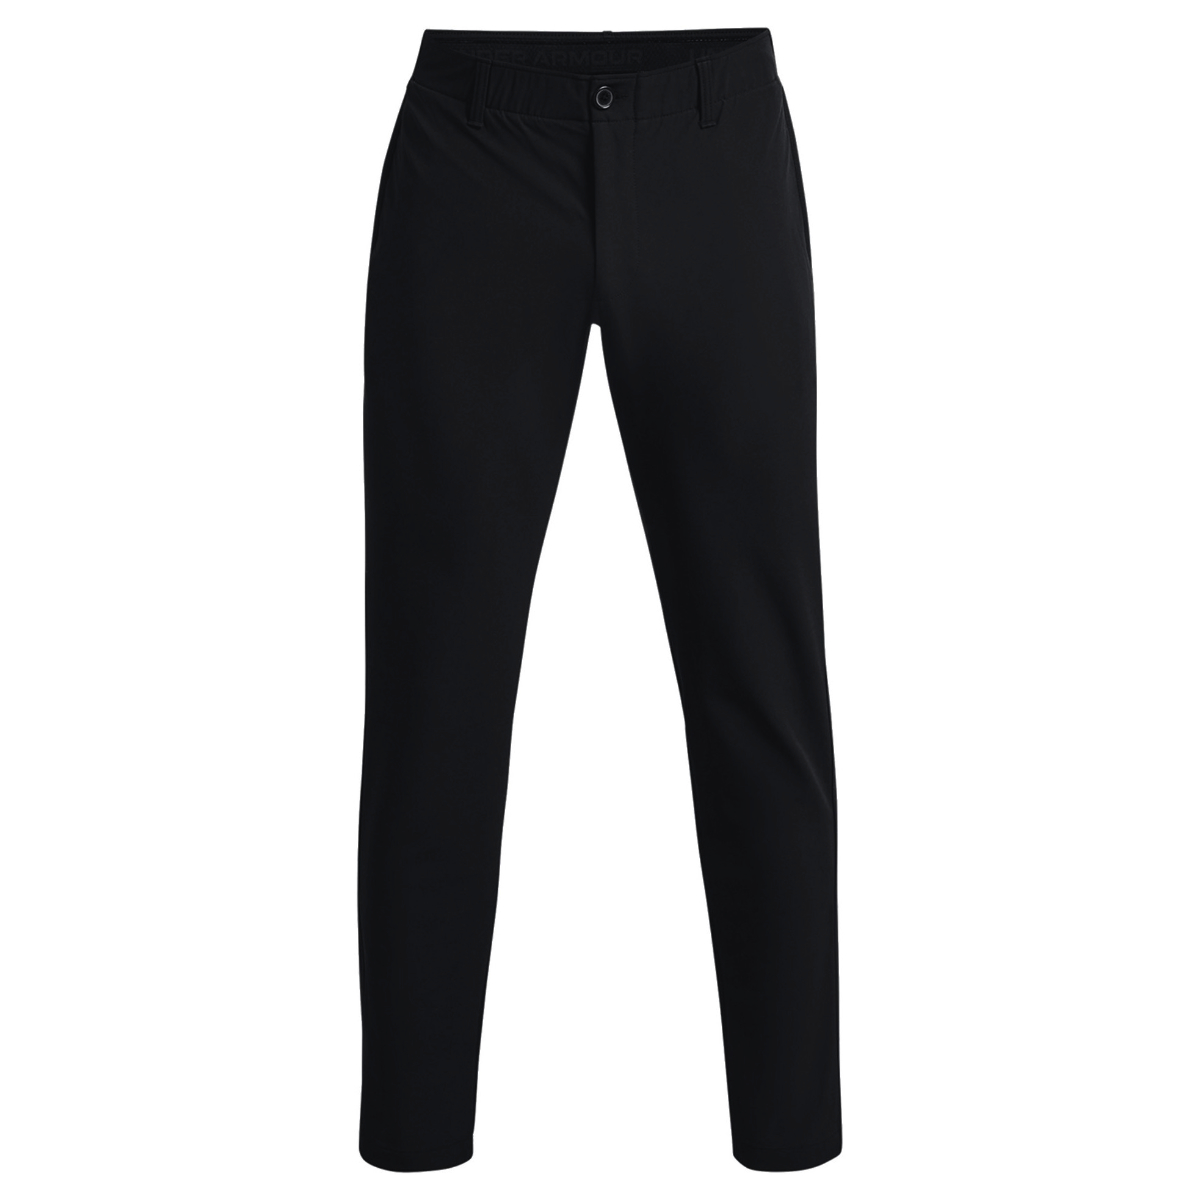 Under Armour Cold Gear Taper Pant Black